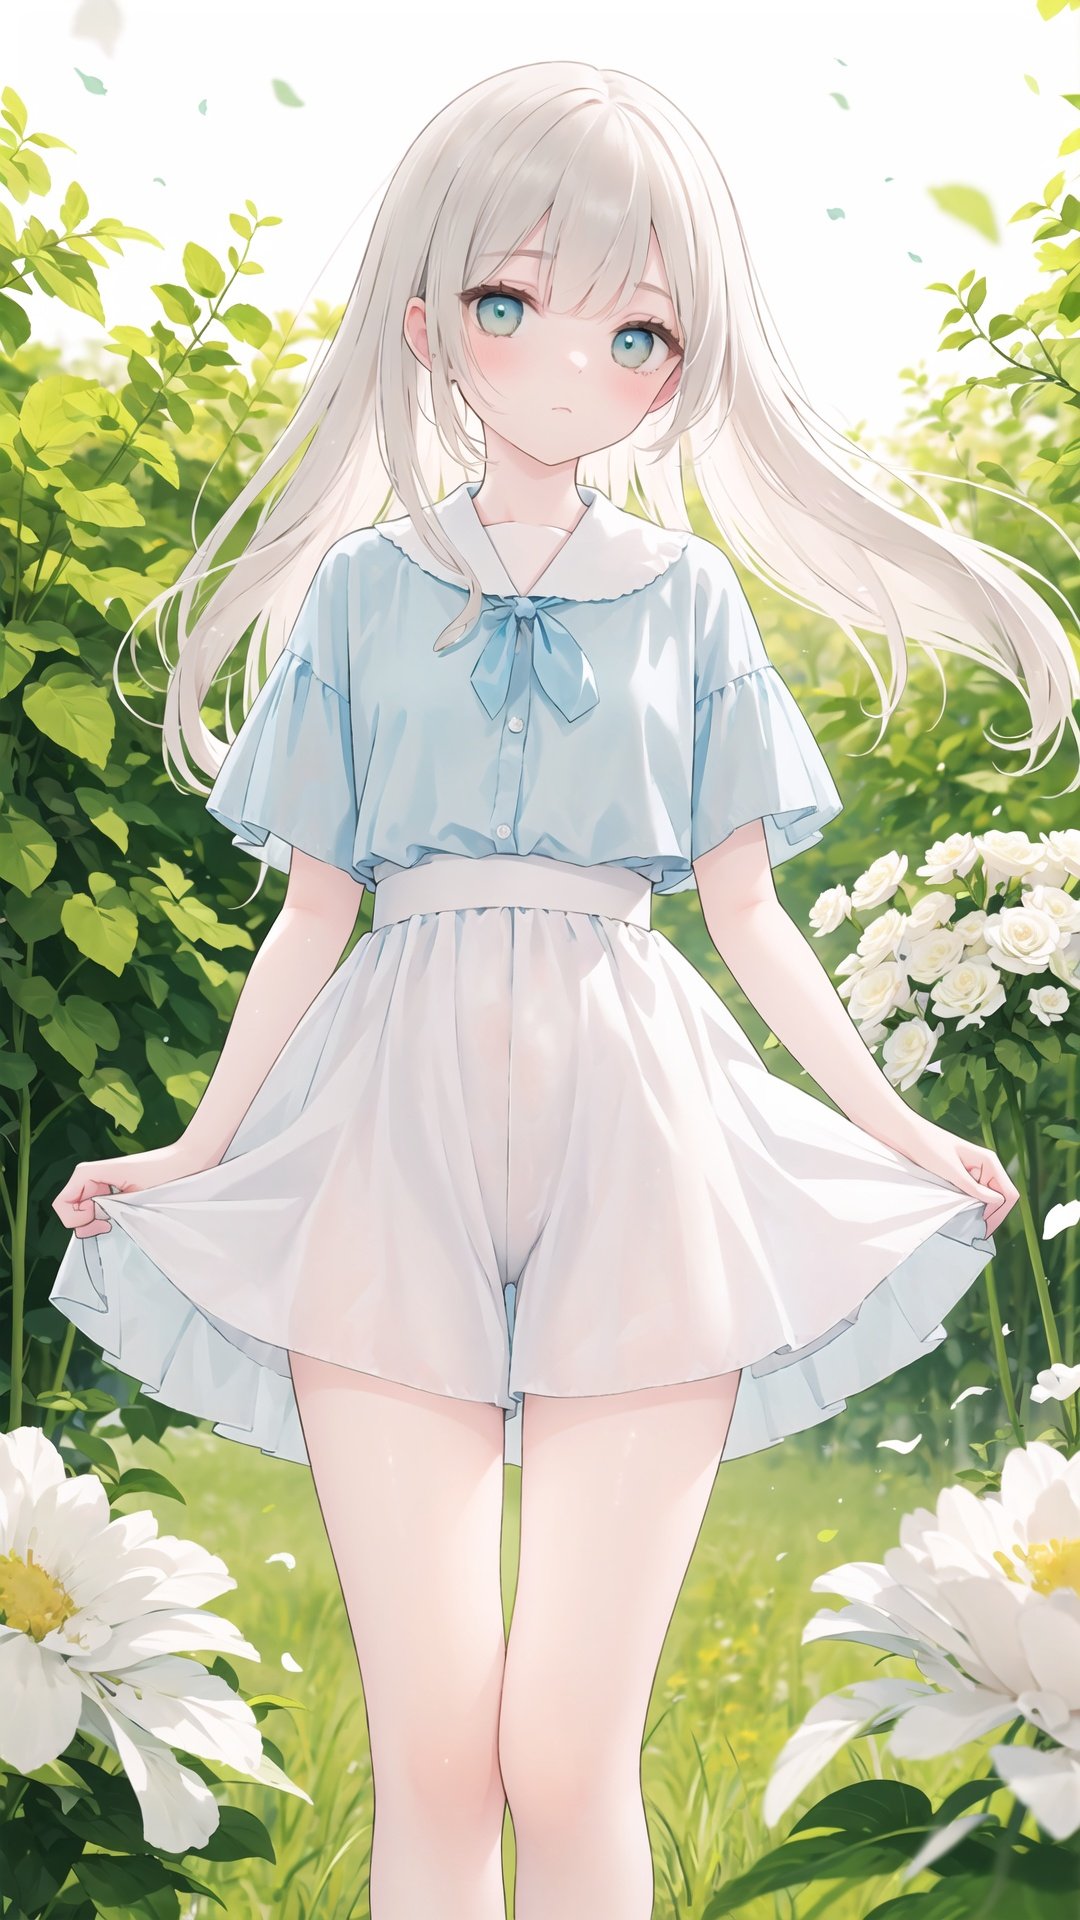 A melancholic autumn scene in a vast flower field,a gentle breeze rustling through the dry grass,fallen leaves scattered among the flowers, a bittersweet atmosphere, a moment of quiet contemplation,1girl,long hair,white_skirt, high-waist_shorts, outfit ,roses,(dynamic angle:1.1),vivid,Soft and warm color palette, delicate brushwork, evocative use of light and shadow, wide shot,subtle details in the wilting flowers,high contrast,color contrast,
wind, breeze, floating hair, (depth of field, bokeh, blurry)
